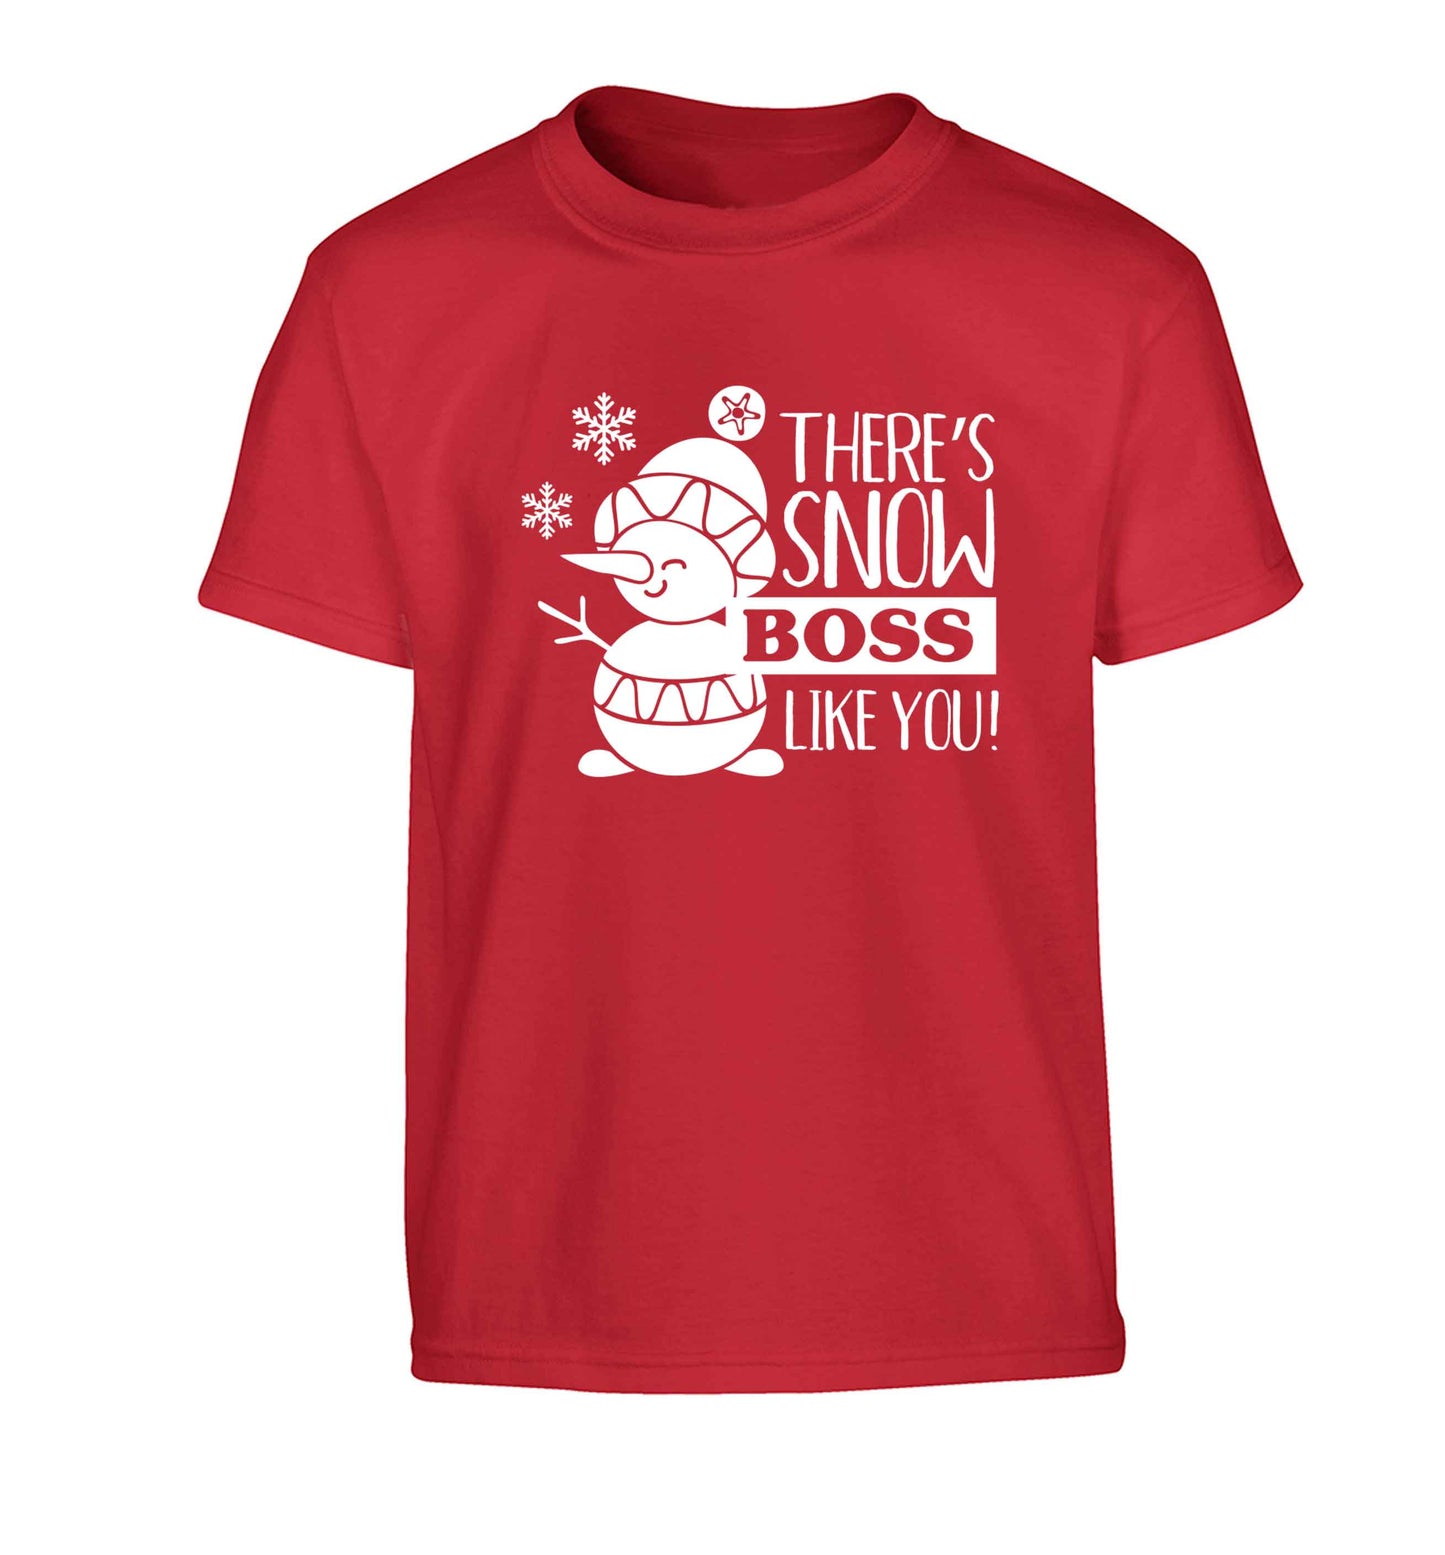 There's snow boss like you Children's red Tshirt 12-13 Years